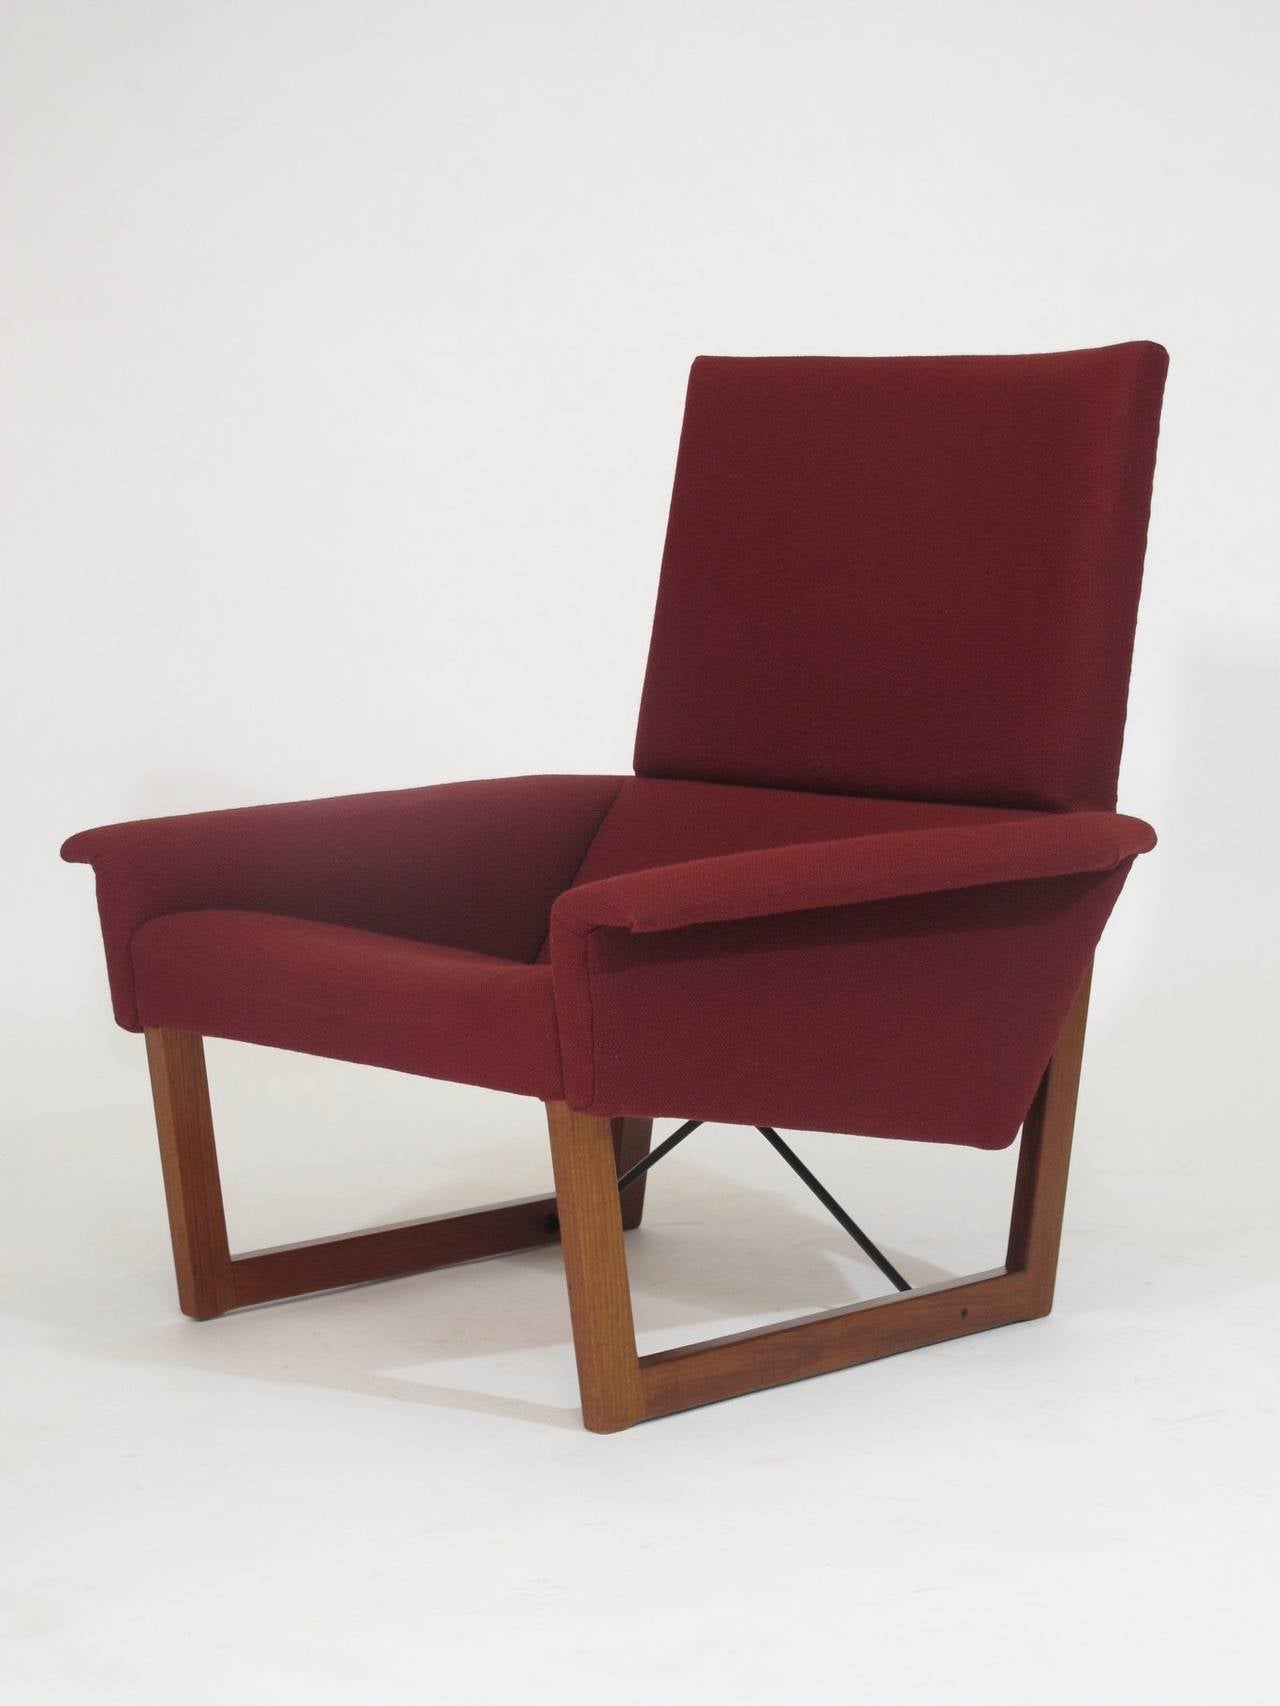 Mid century lounge chair upholstered in original red wool fabric raised on teak frame with angled metal cross stretcher designed by Illum Wikkelso for Hjorring Madrasfabrik model # 113